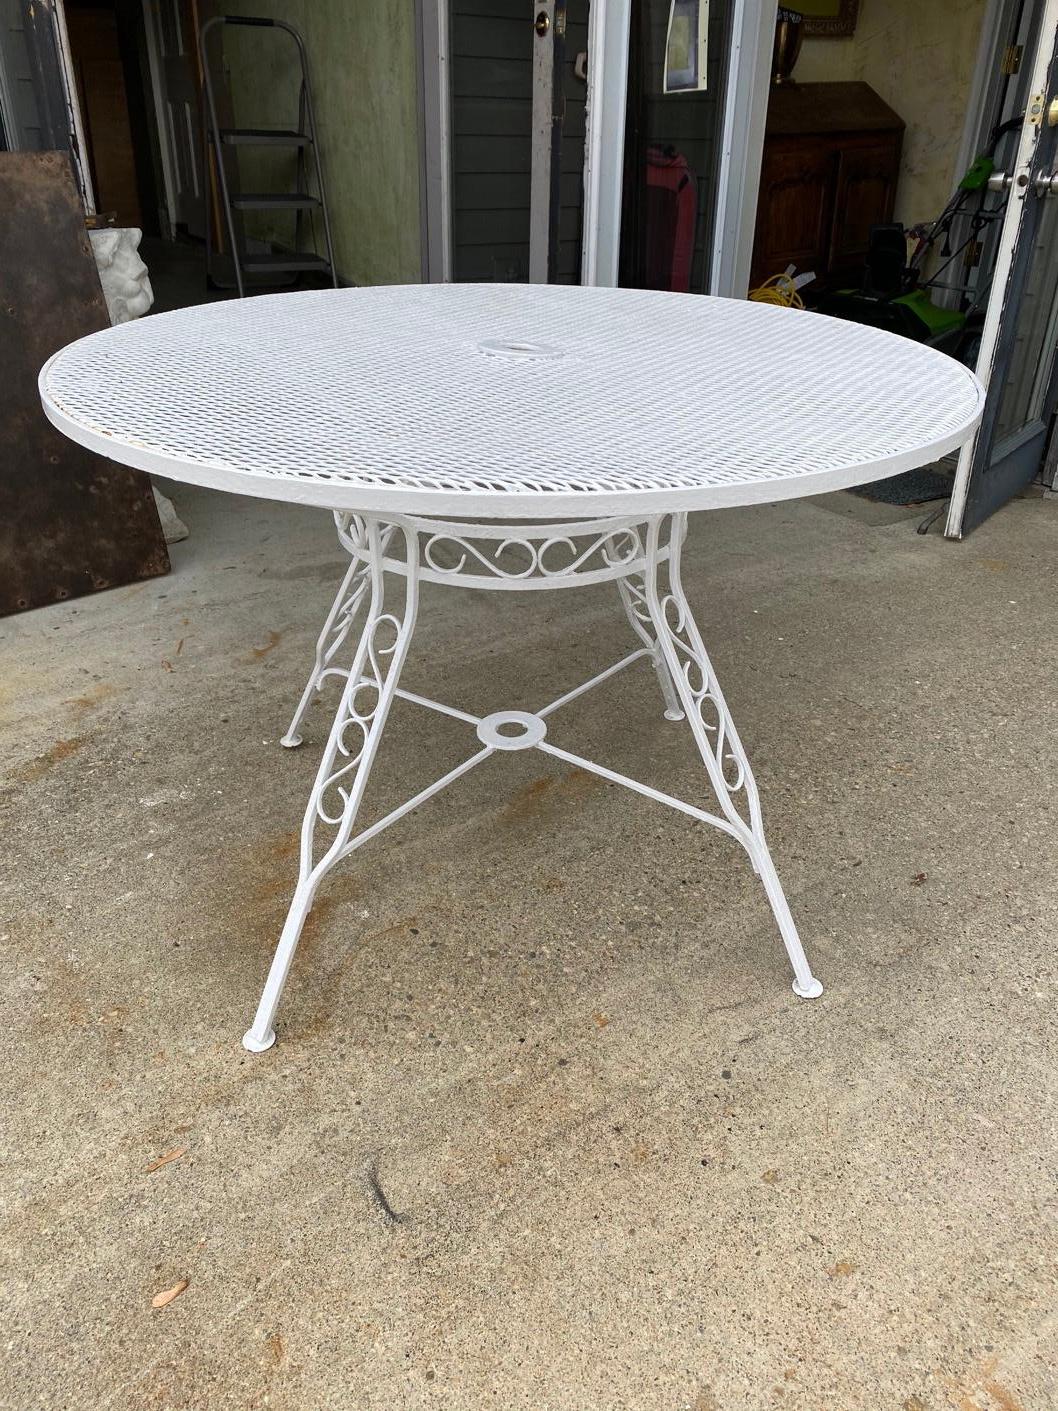 American Check Mid-Century Modern Russell Woodard Style Patio Dining Table